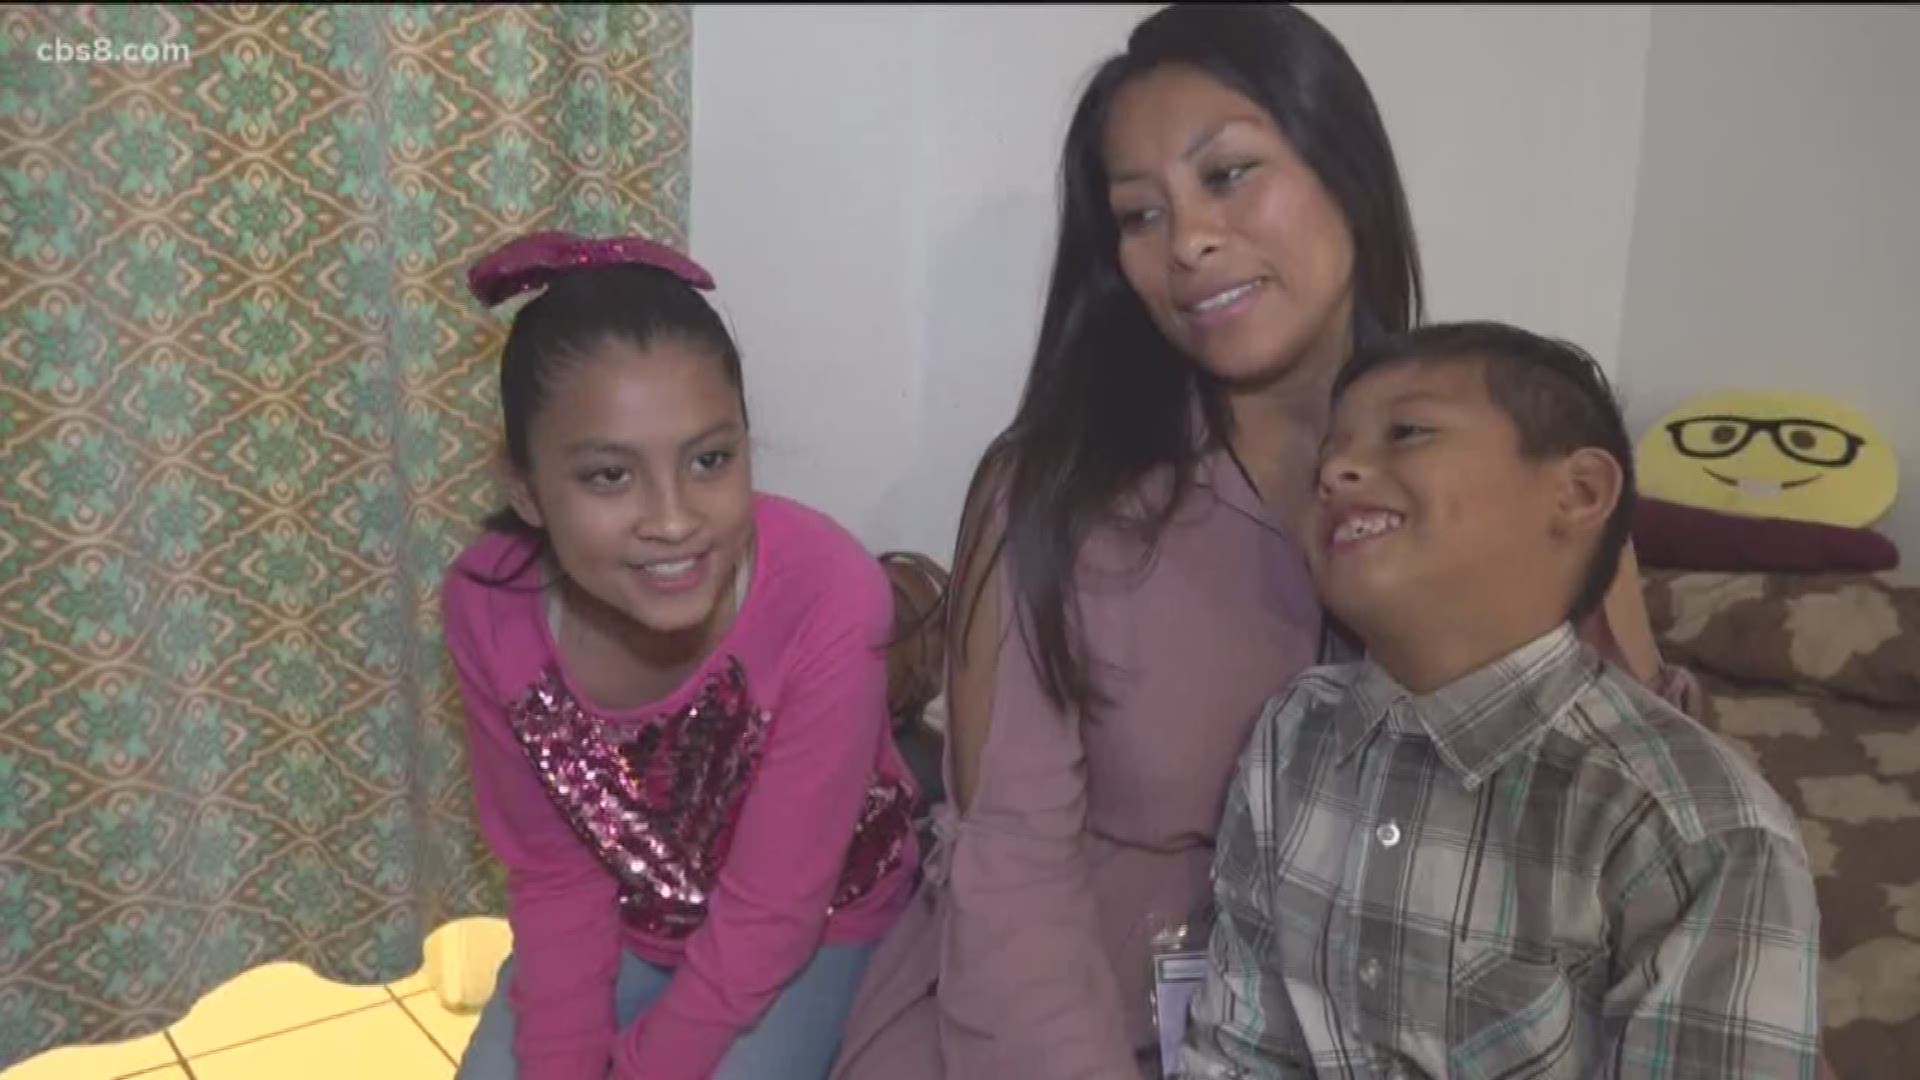 There is good news to report about a mother from Mexico and her three children that CBS News 8 has been following for the past six months.